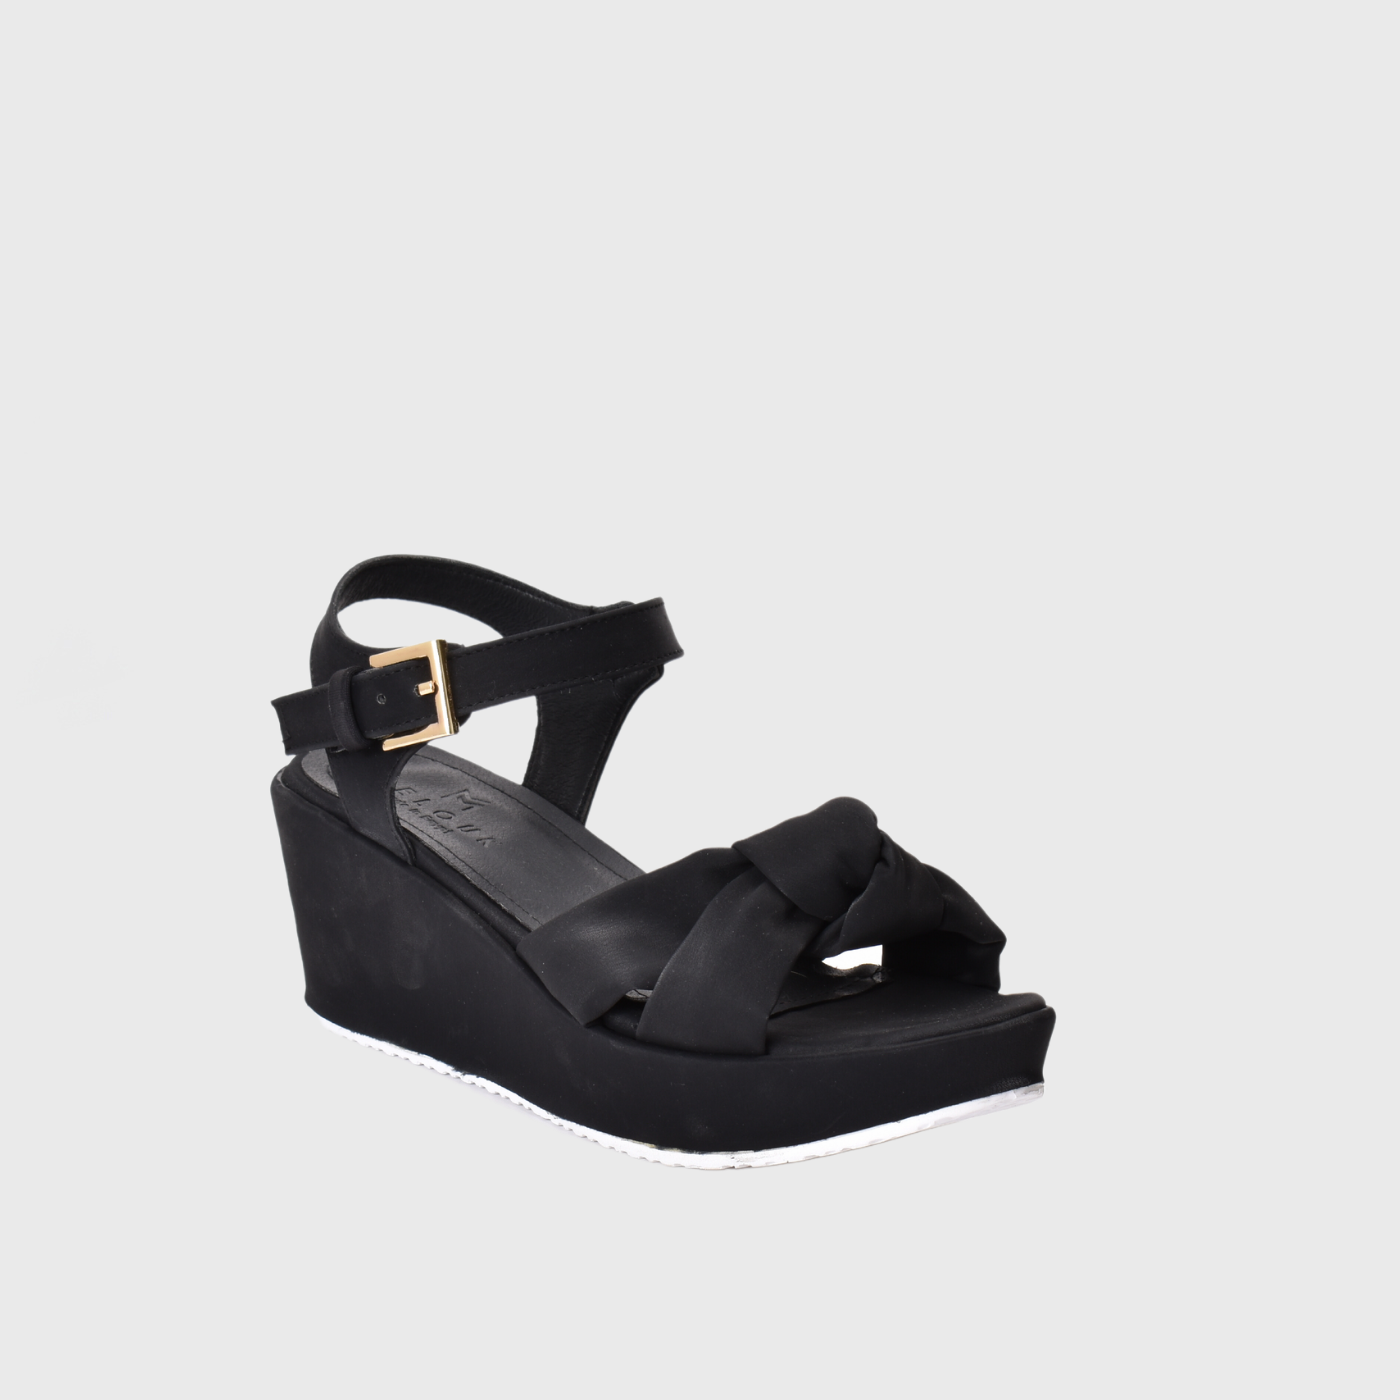 Black Wedge Sandal With Bow